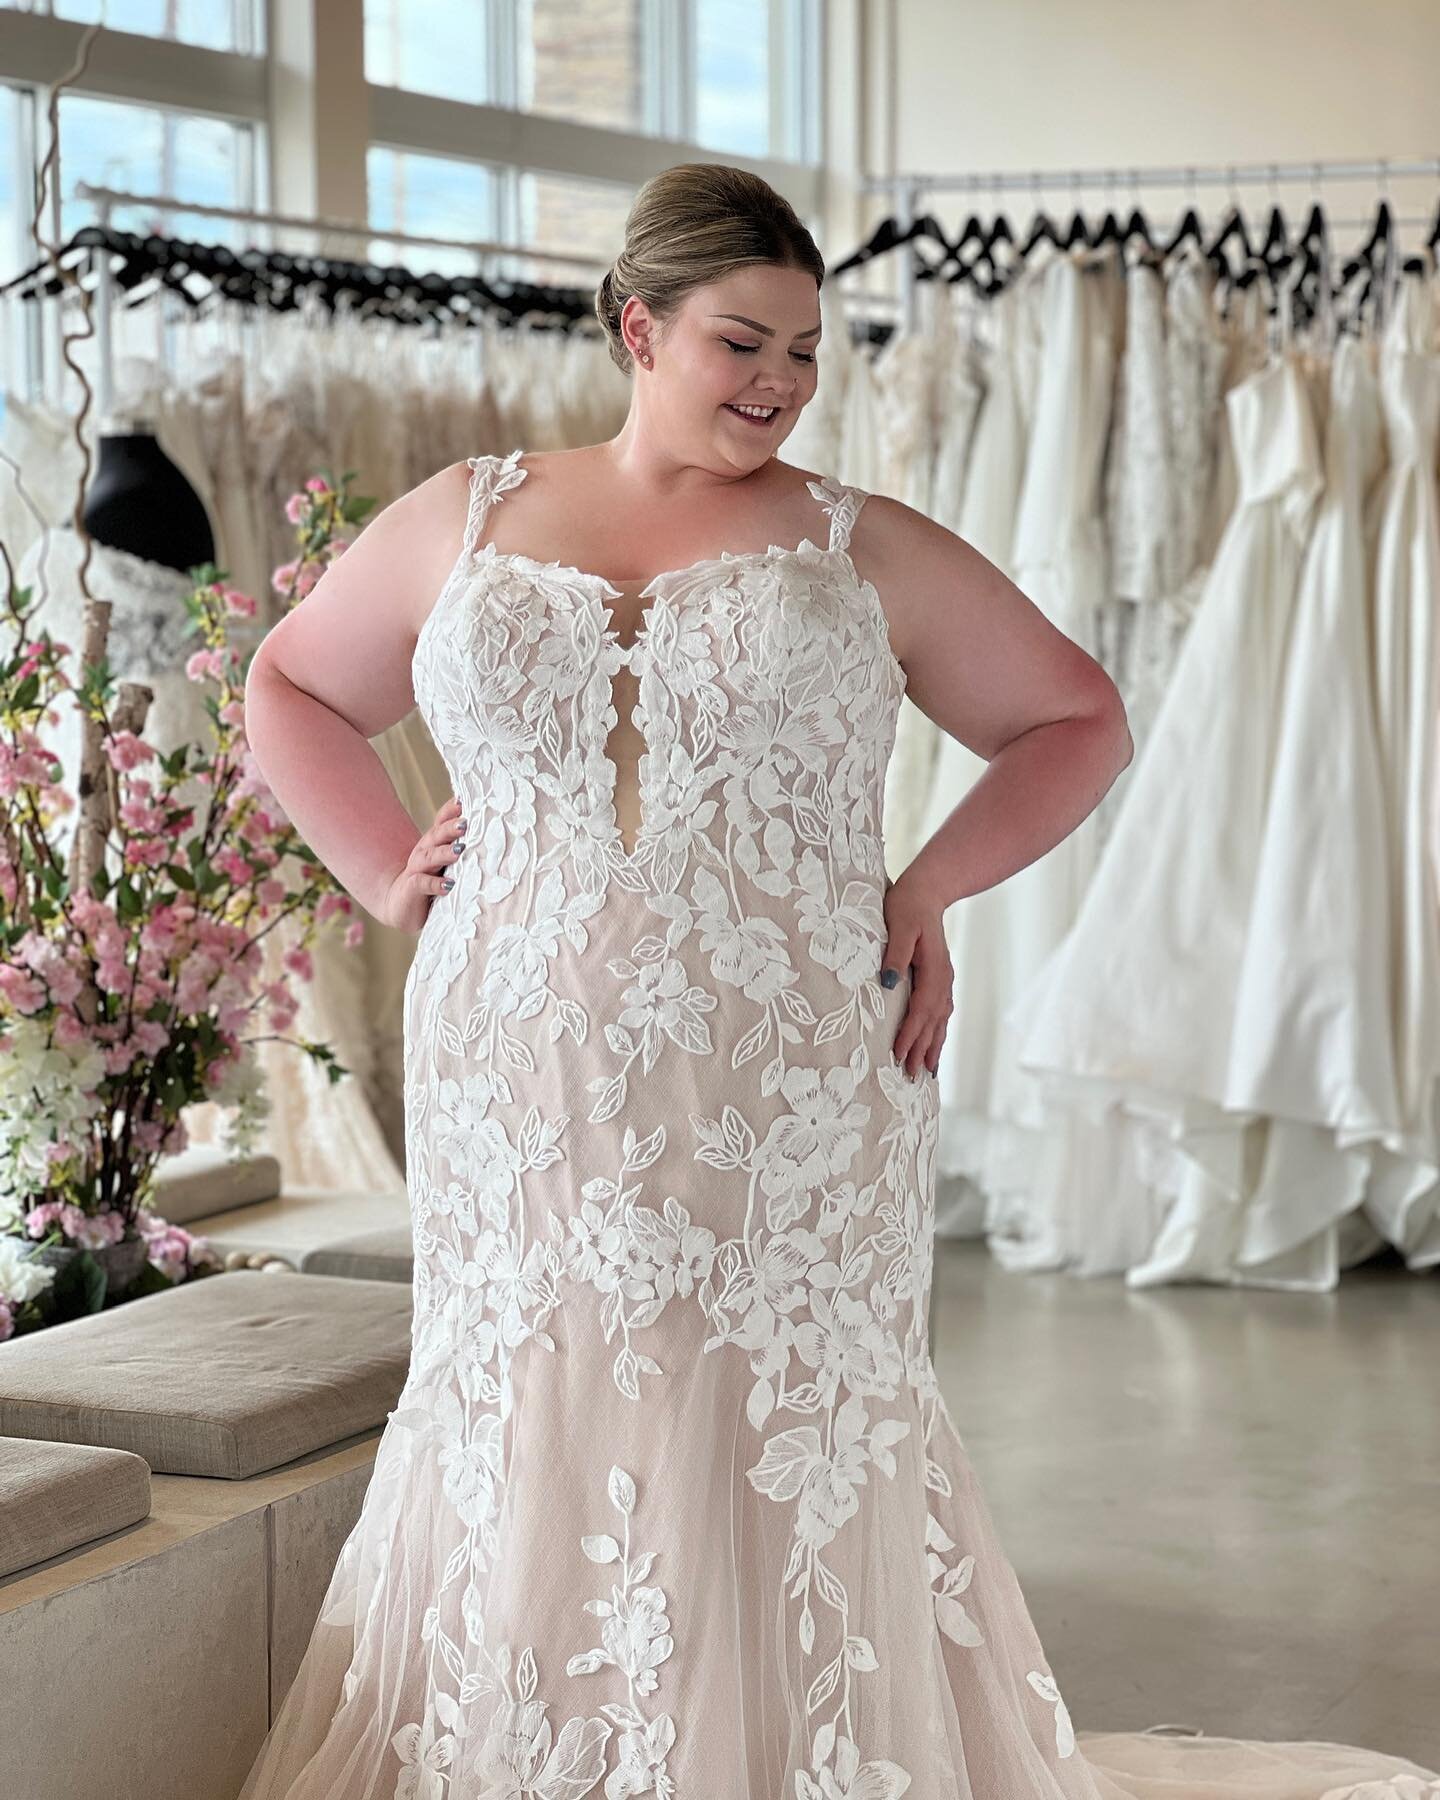 Up close and in *awe* of this wedding dress 😍😍 Love this whole design - from the flowing lace, the flattering neckline, to the gentle color shade!